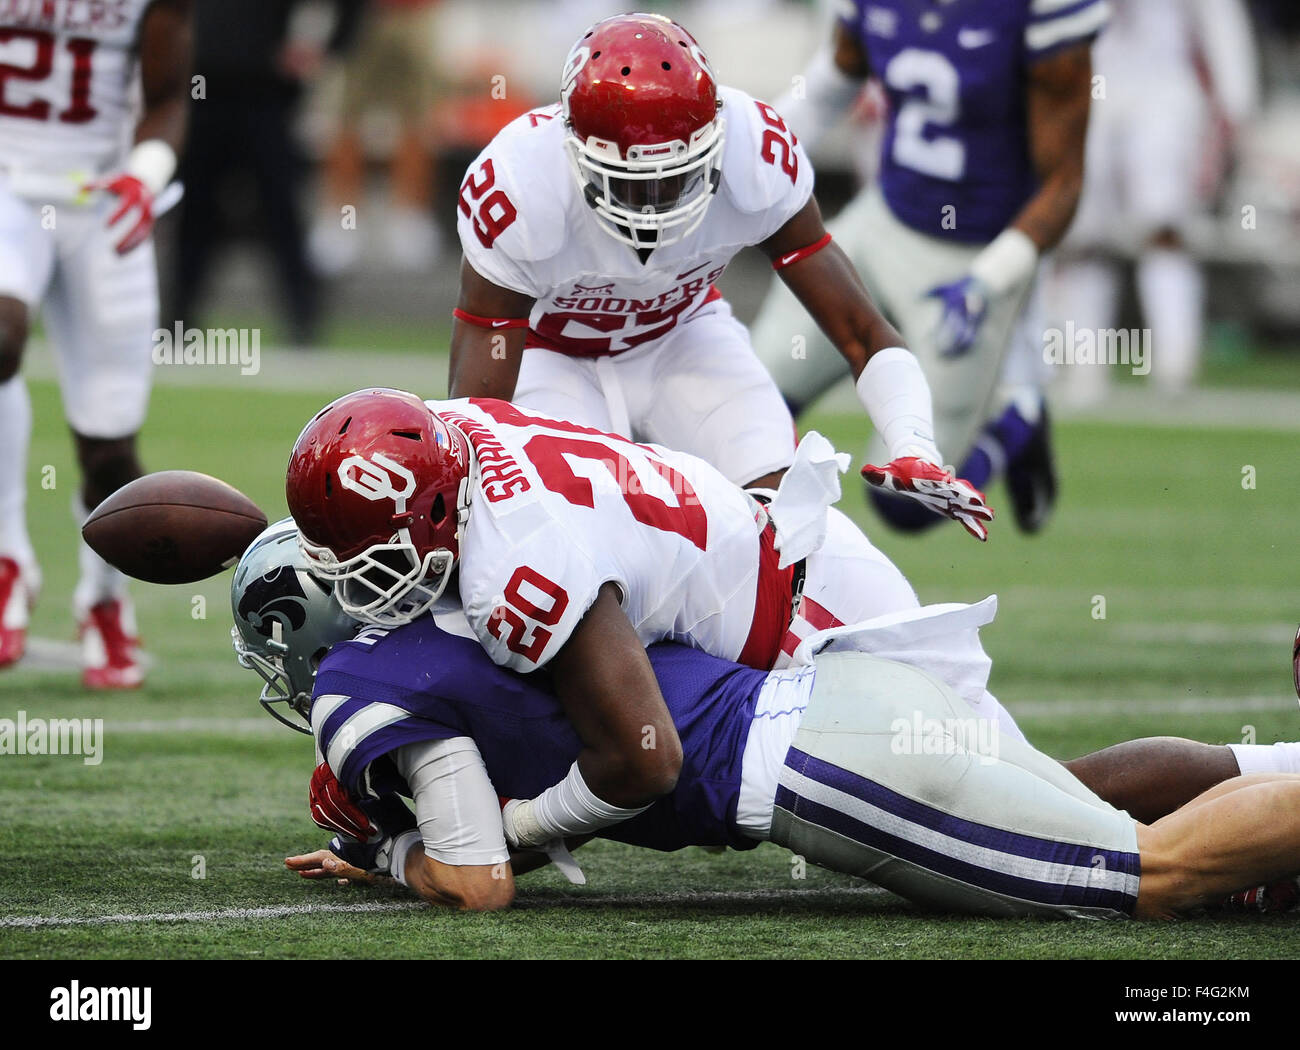 Manhattan, Kansas, USA. 17th Oct, 2015. Oklahoma Sooners linebacker Frank Shannon (20) forces Kansas State Wildcats quarterback Joe Hubener (8) to fumble late in the game during the NCAA Football game between the Oklahoma Sooners and Kansas State Wildcats at Bill Snyder Family Stadium in Manhattan, Kansas. Kendall Shaw/CSM/Alamy Live News Stock Photo